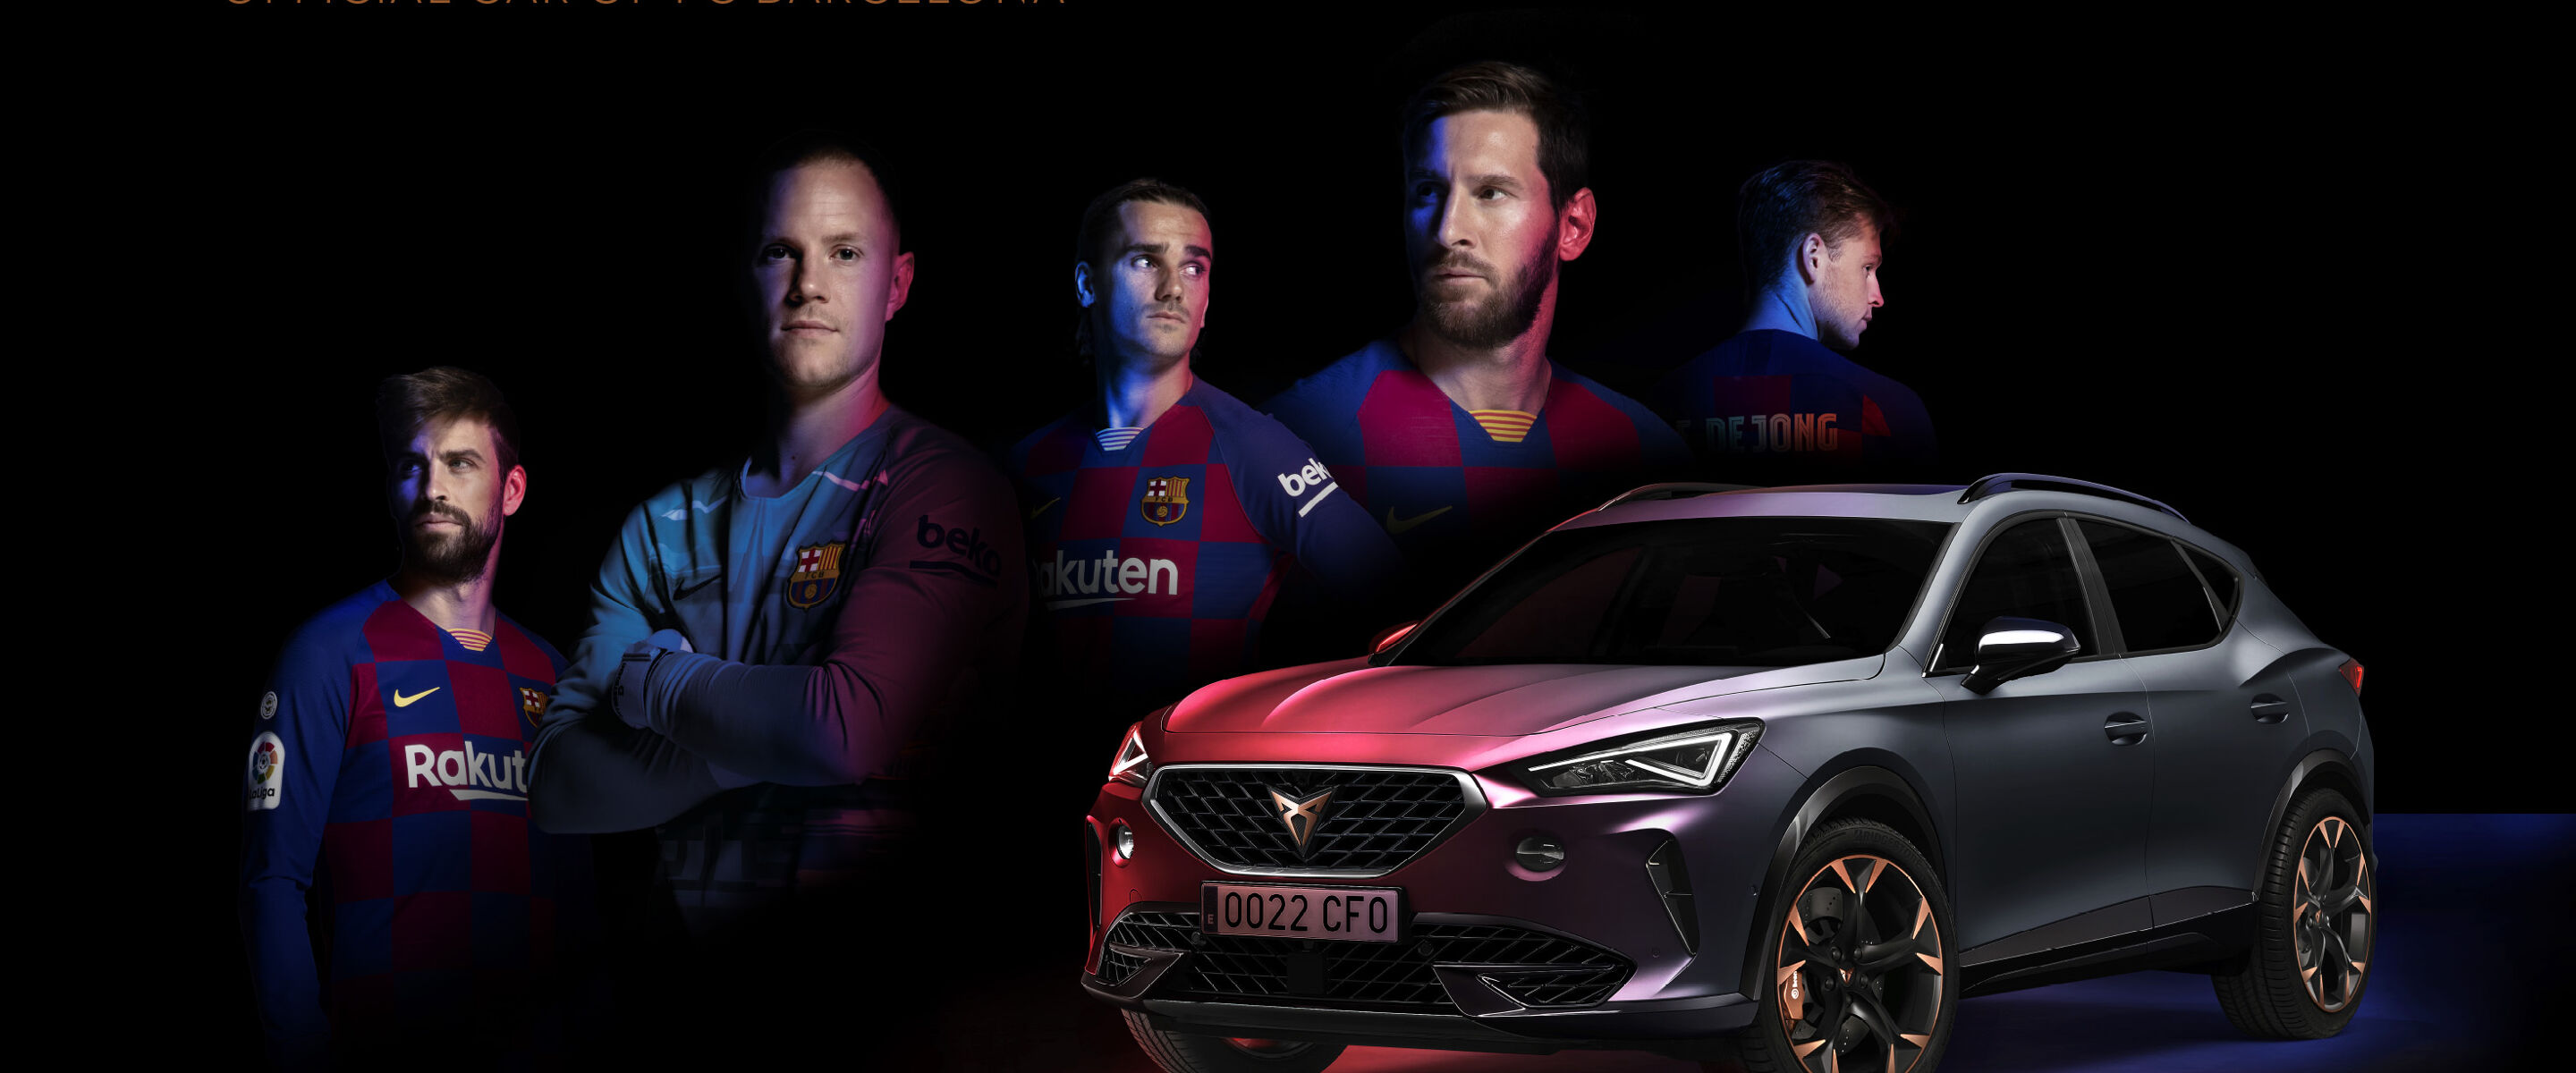 the-cupra-formentor-becomes-the-official-car-of-fc-barcelona-02-hq